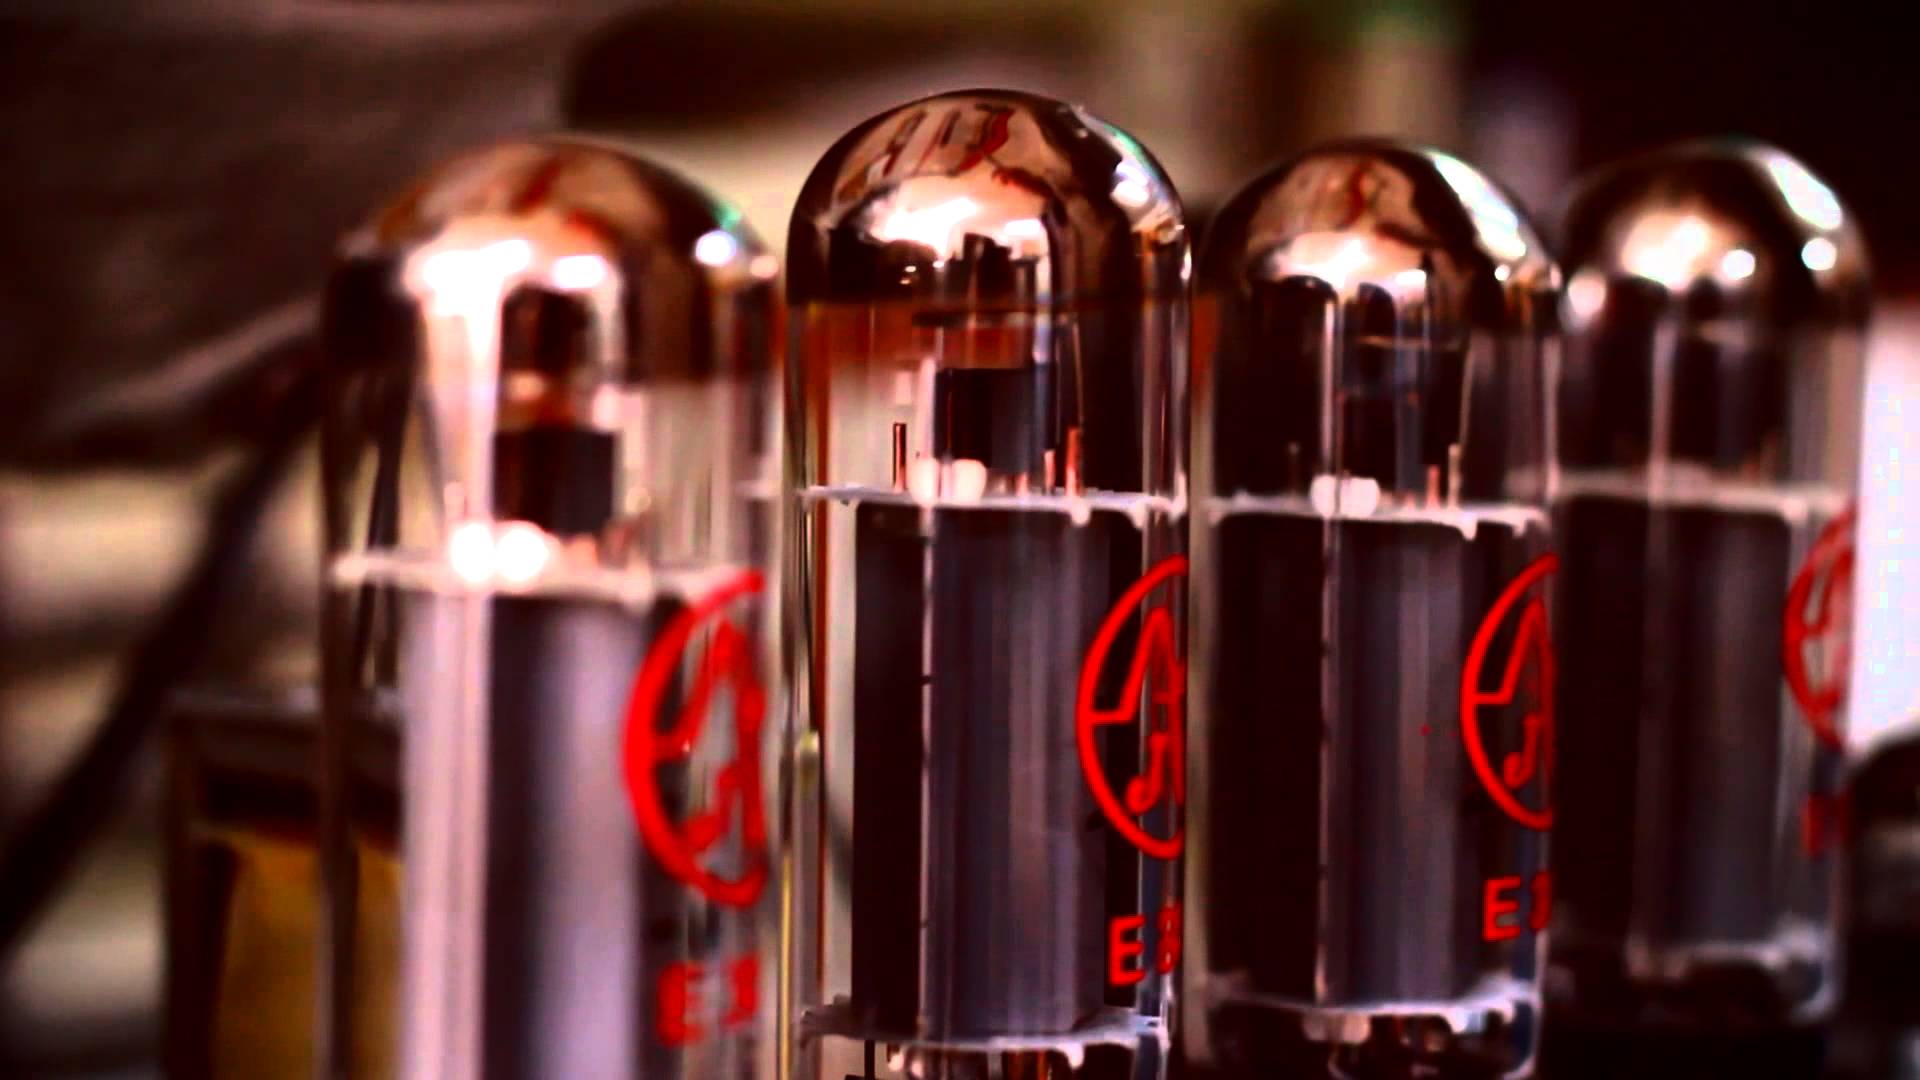 Handmade guitar tube amps by MPF.(abridged version) - YouTube